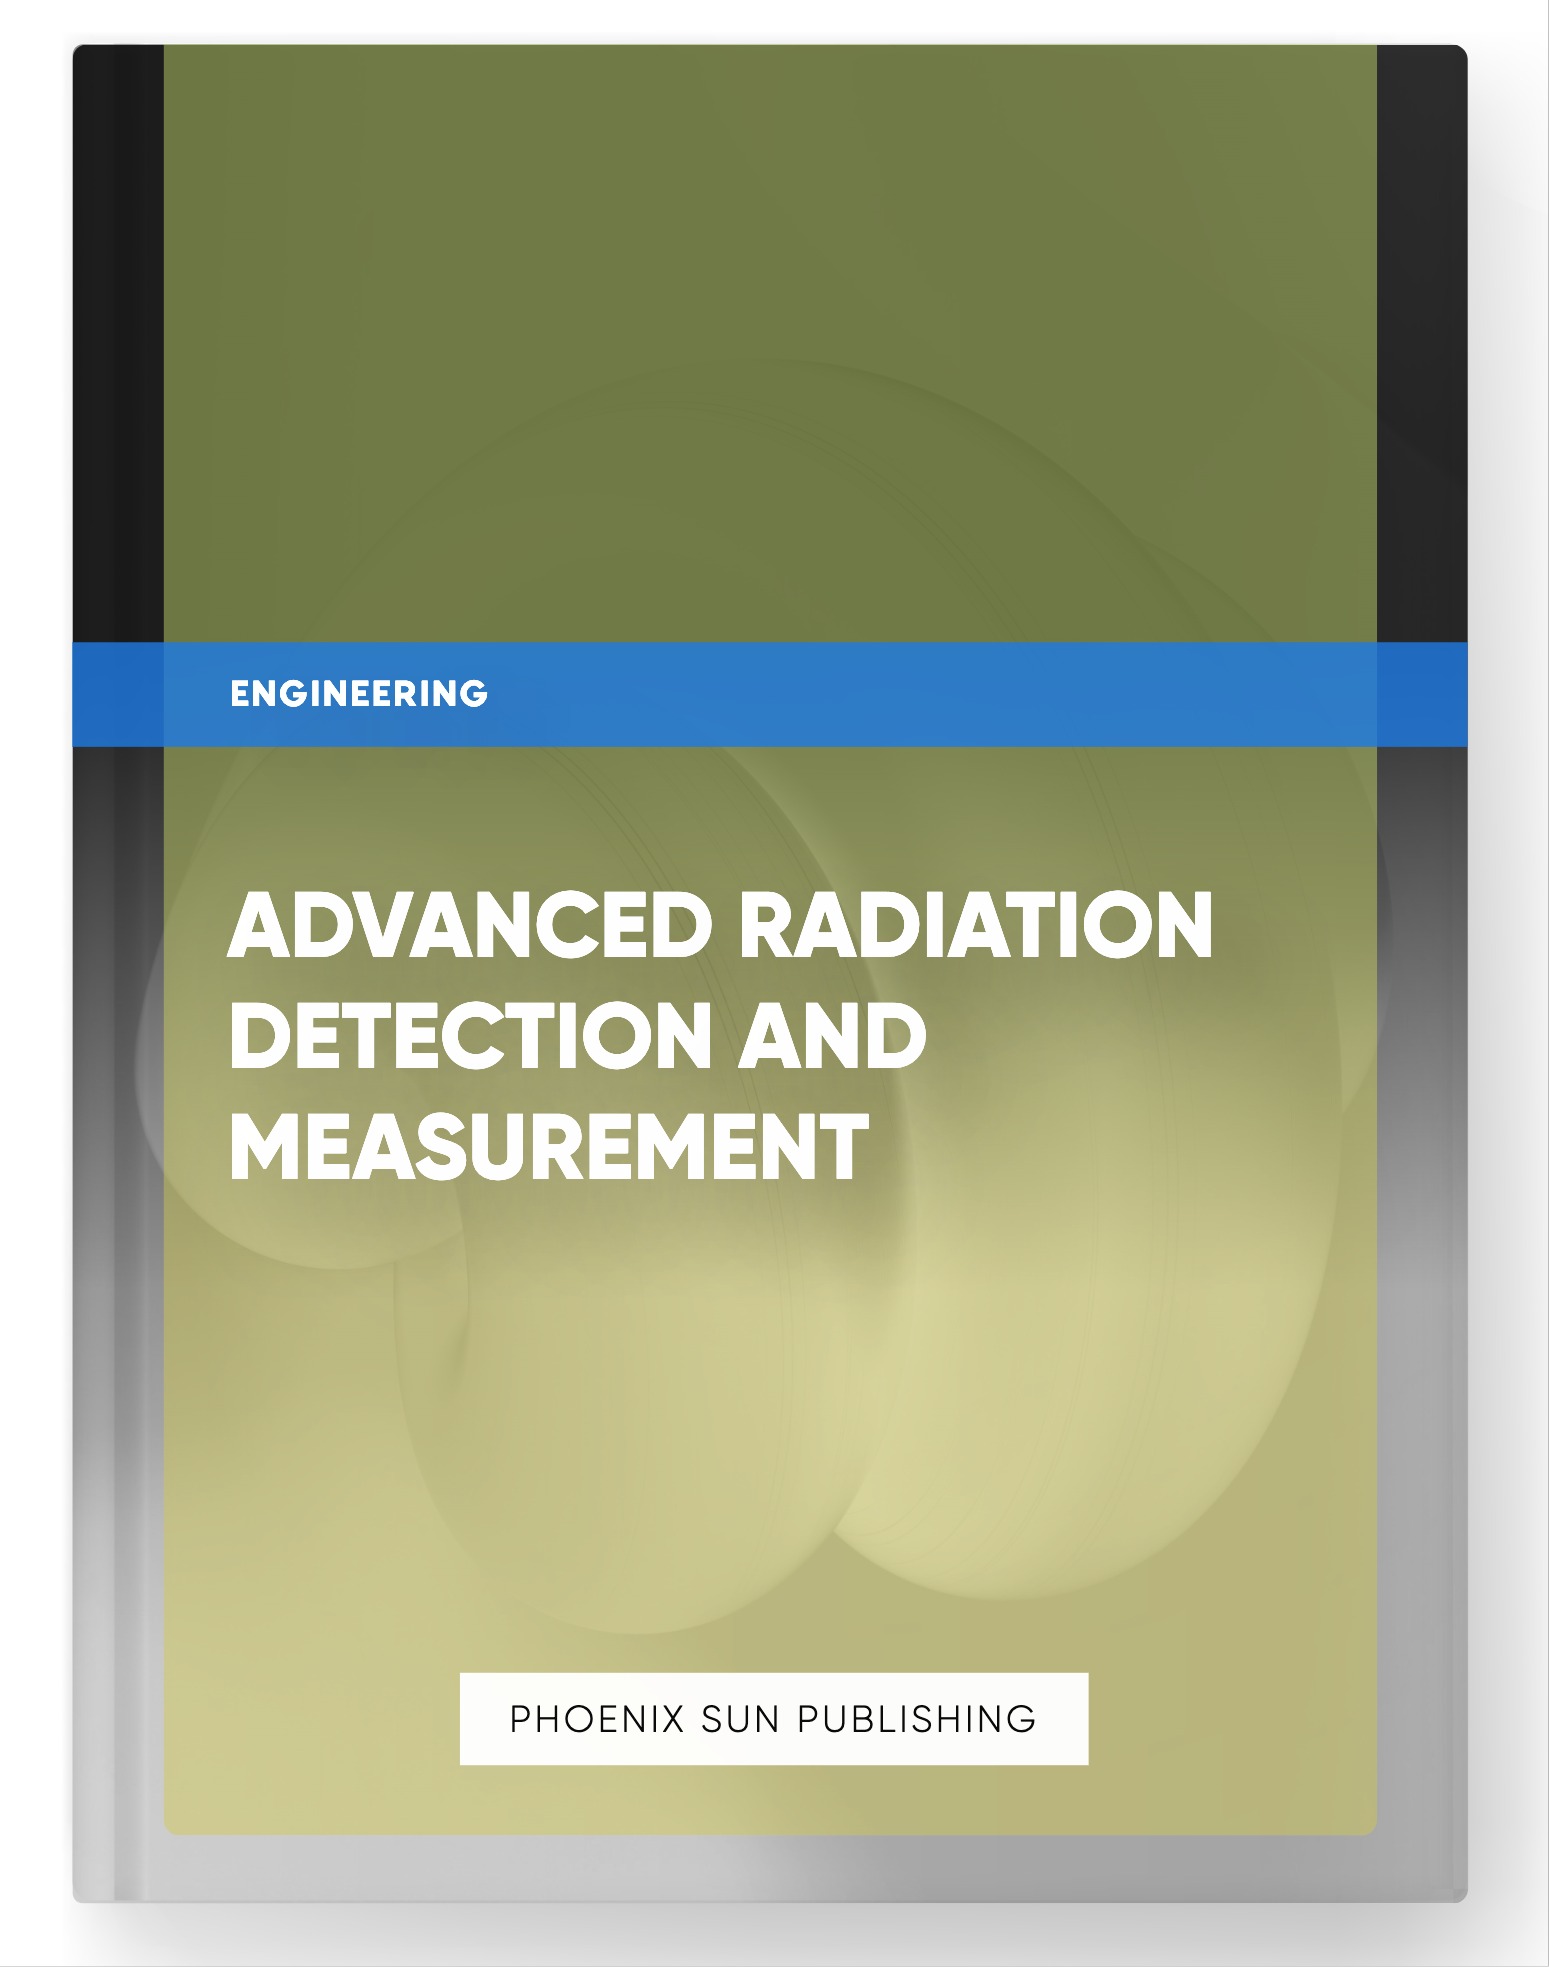 Advanced Radiation Detection and Measurement